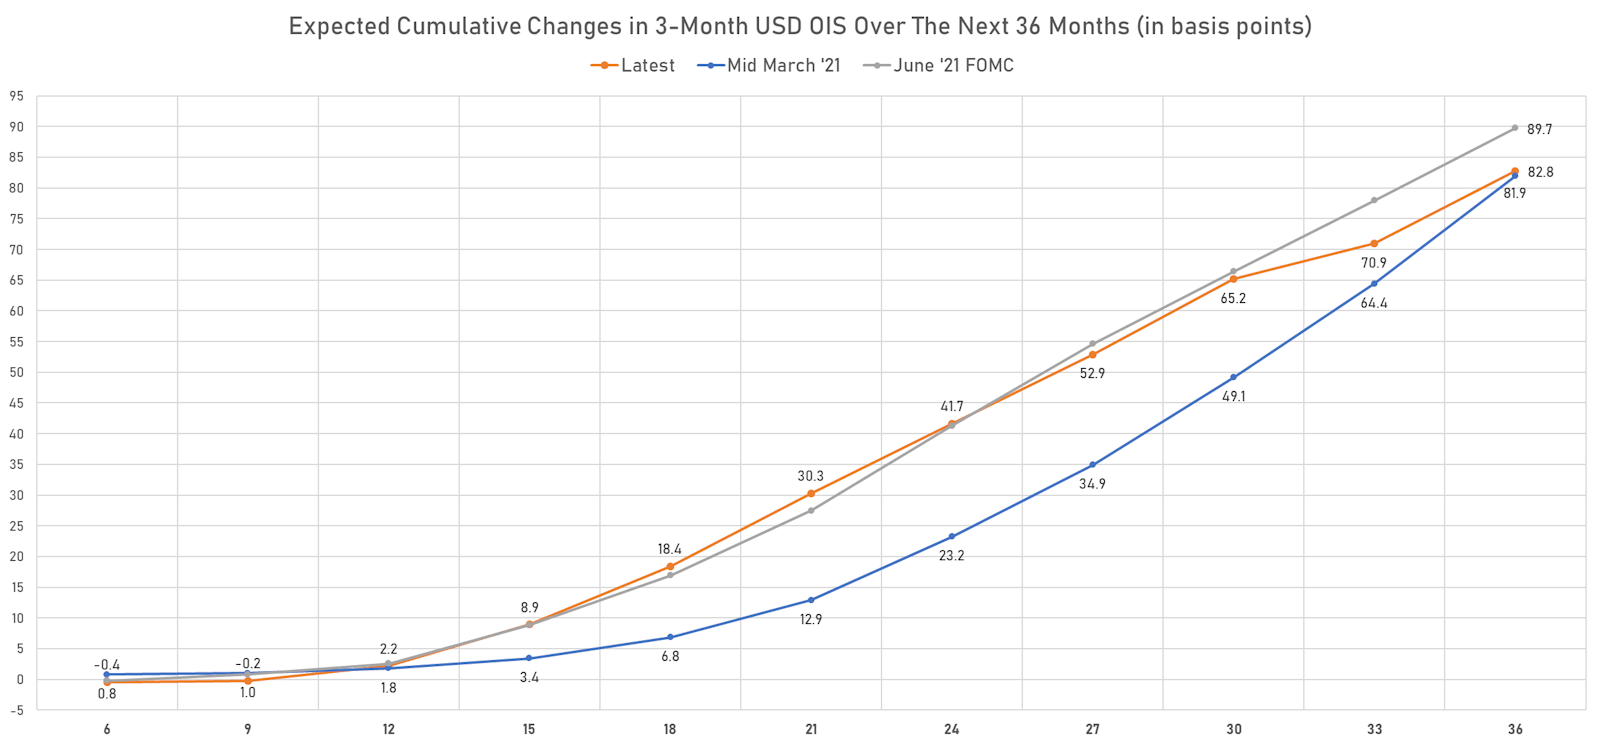 Expected hikes derived from the 3-Month USD OIS Forward Curve | Sources: ϕpost, Refinitiv data